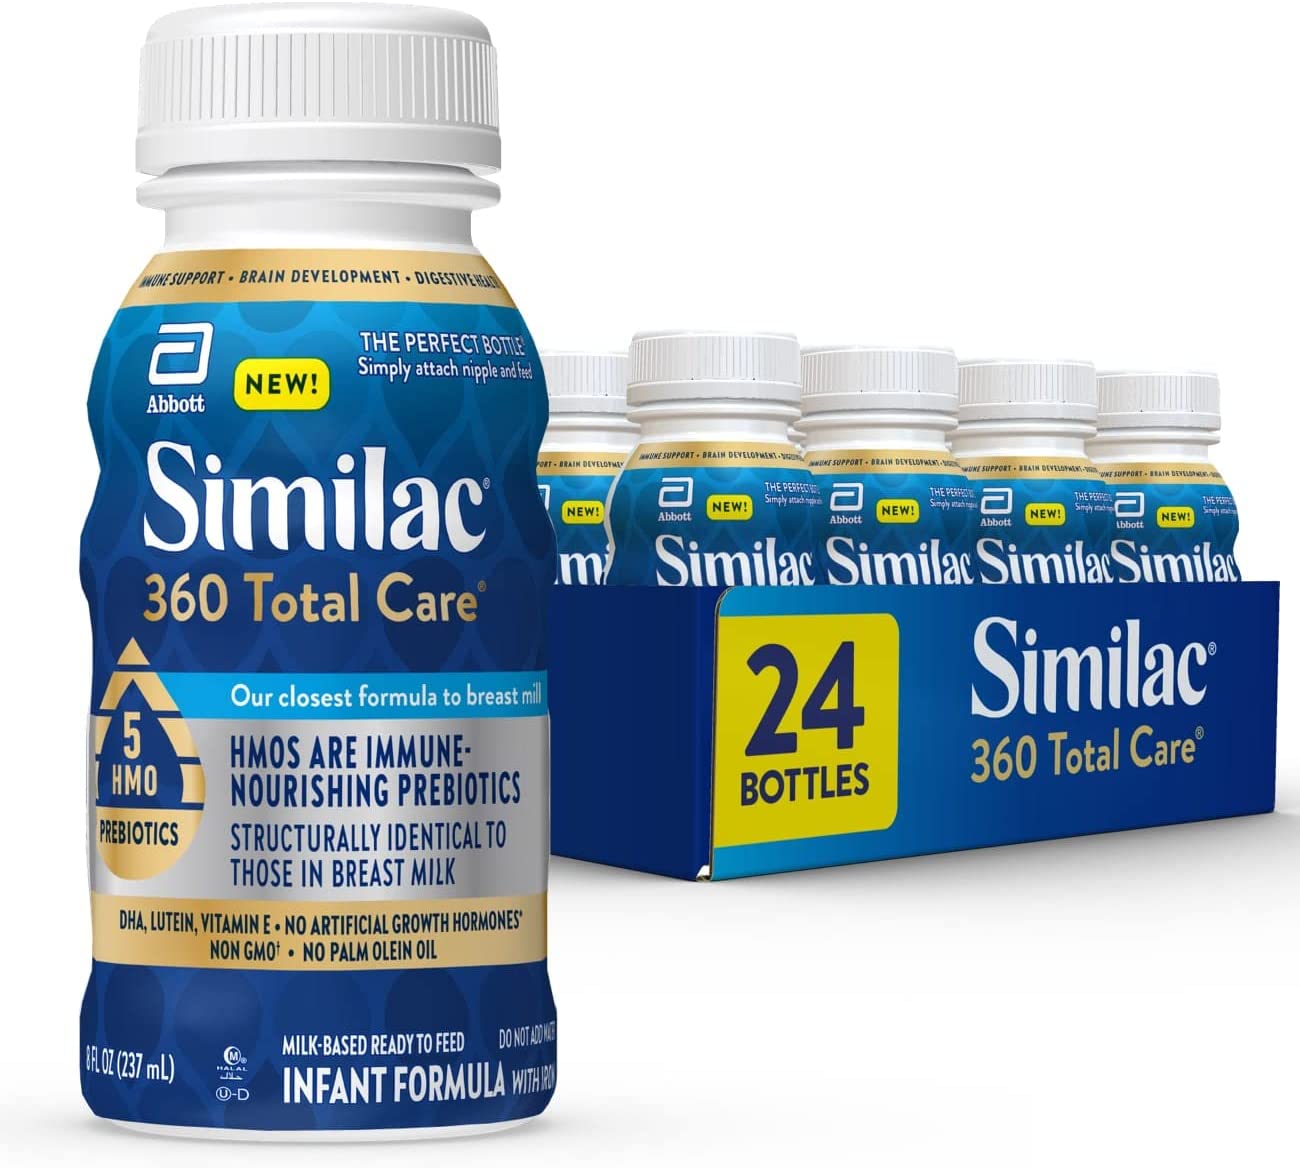 How To Store Similac 360 Total Care